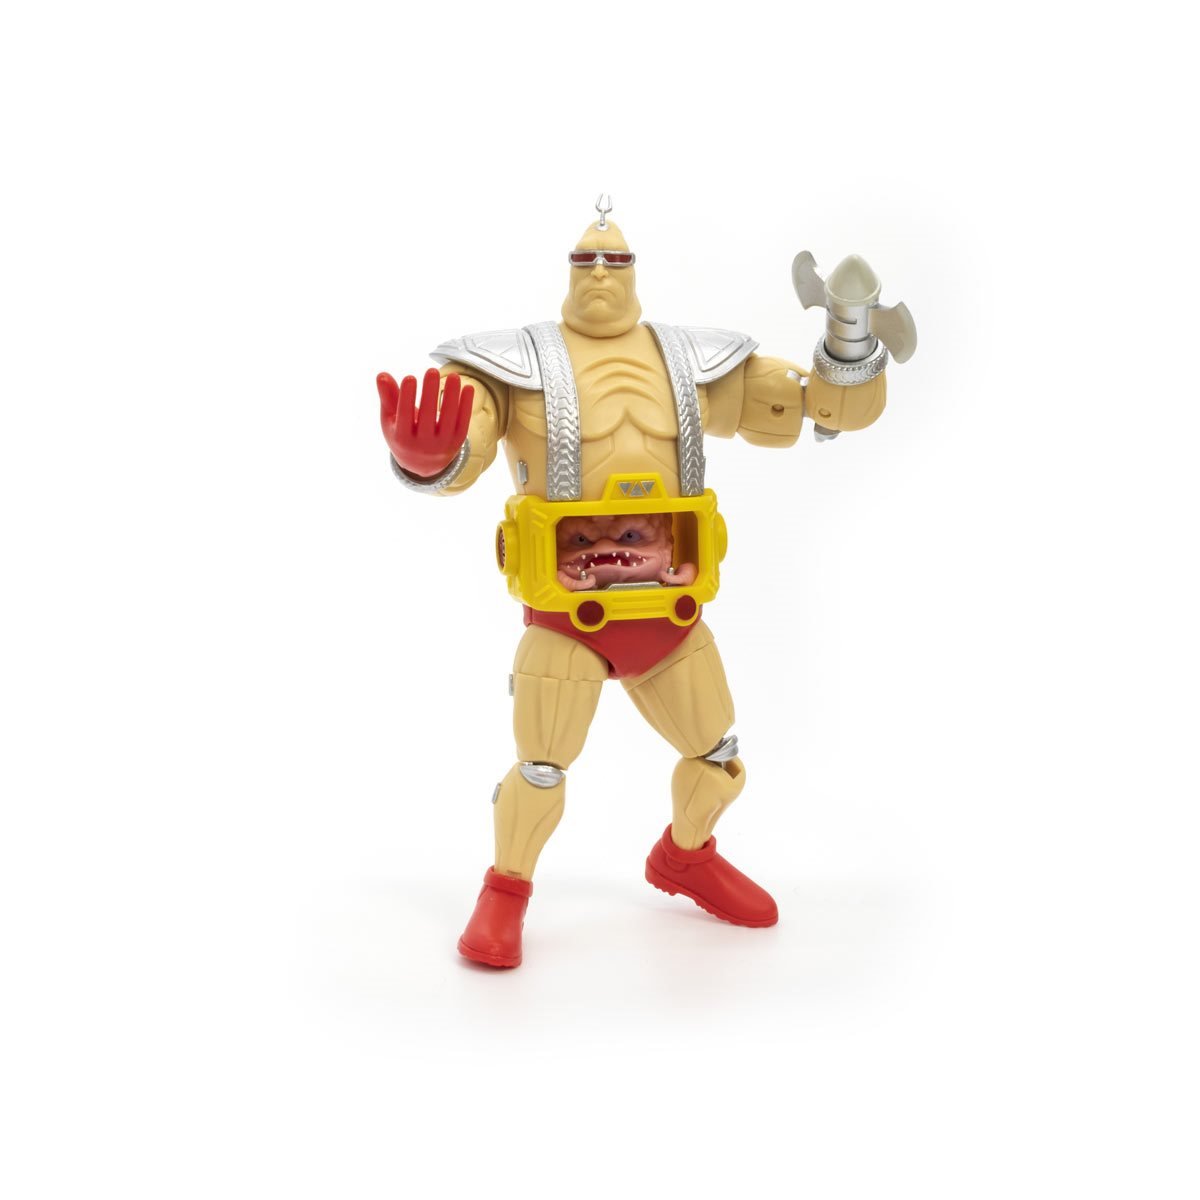 THE LOYAL SUBJECTS Teenage Mutant Ninja Turtles Krang with Android Body BST AXN 8-Inch XL Action Figure